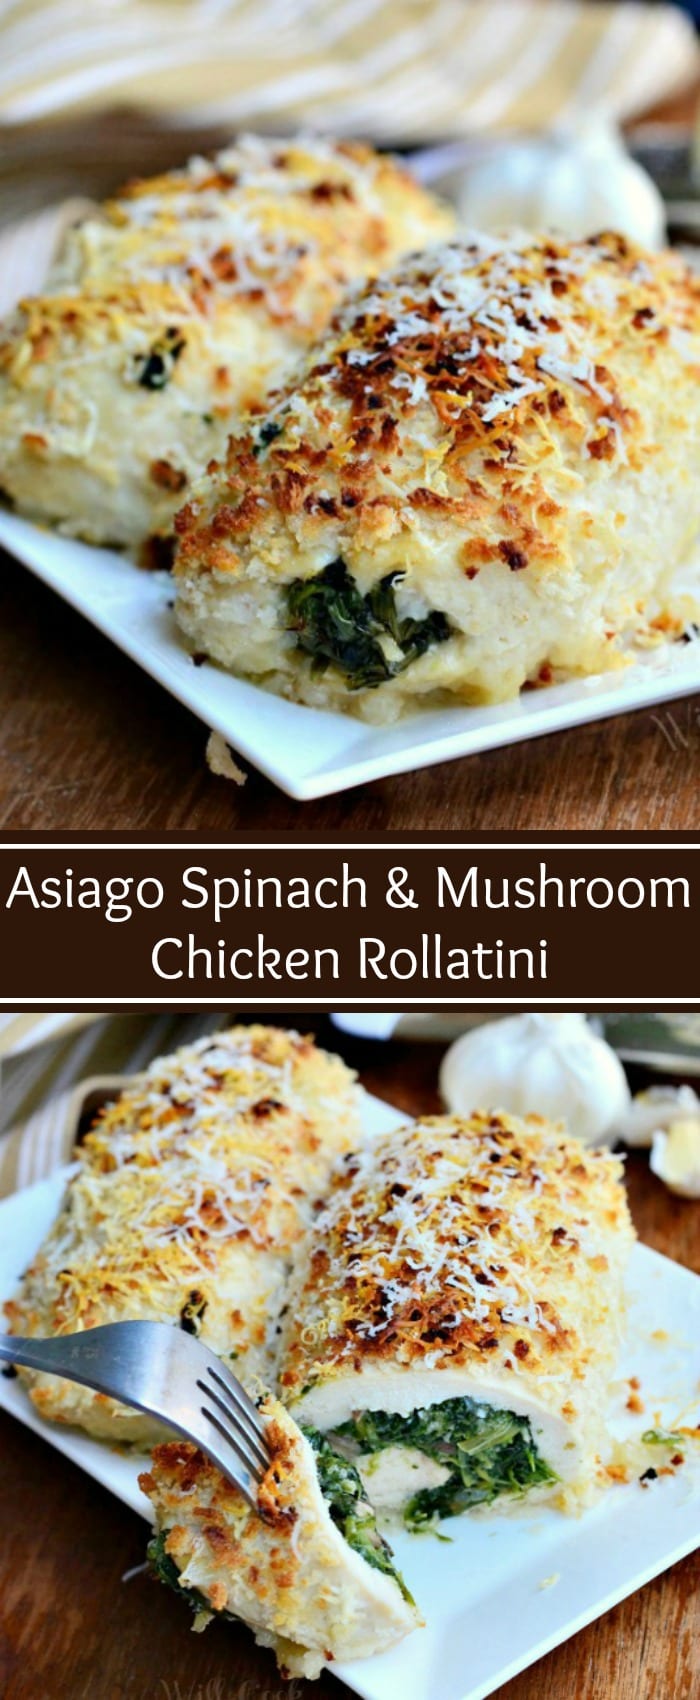 Asiago Spinach & Mushroom Chicken Rollatini. Juicy chicken breast pounded thin and rolled with a mixture of spinach, mushrooms, garlic and Asiago cheese. Then, it's lightly rolled in Panko crumbs and more Asiago cheese. #chicken #spinach #cheese #asiago #easydinner #chickenrecipes